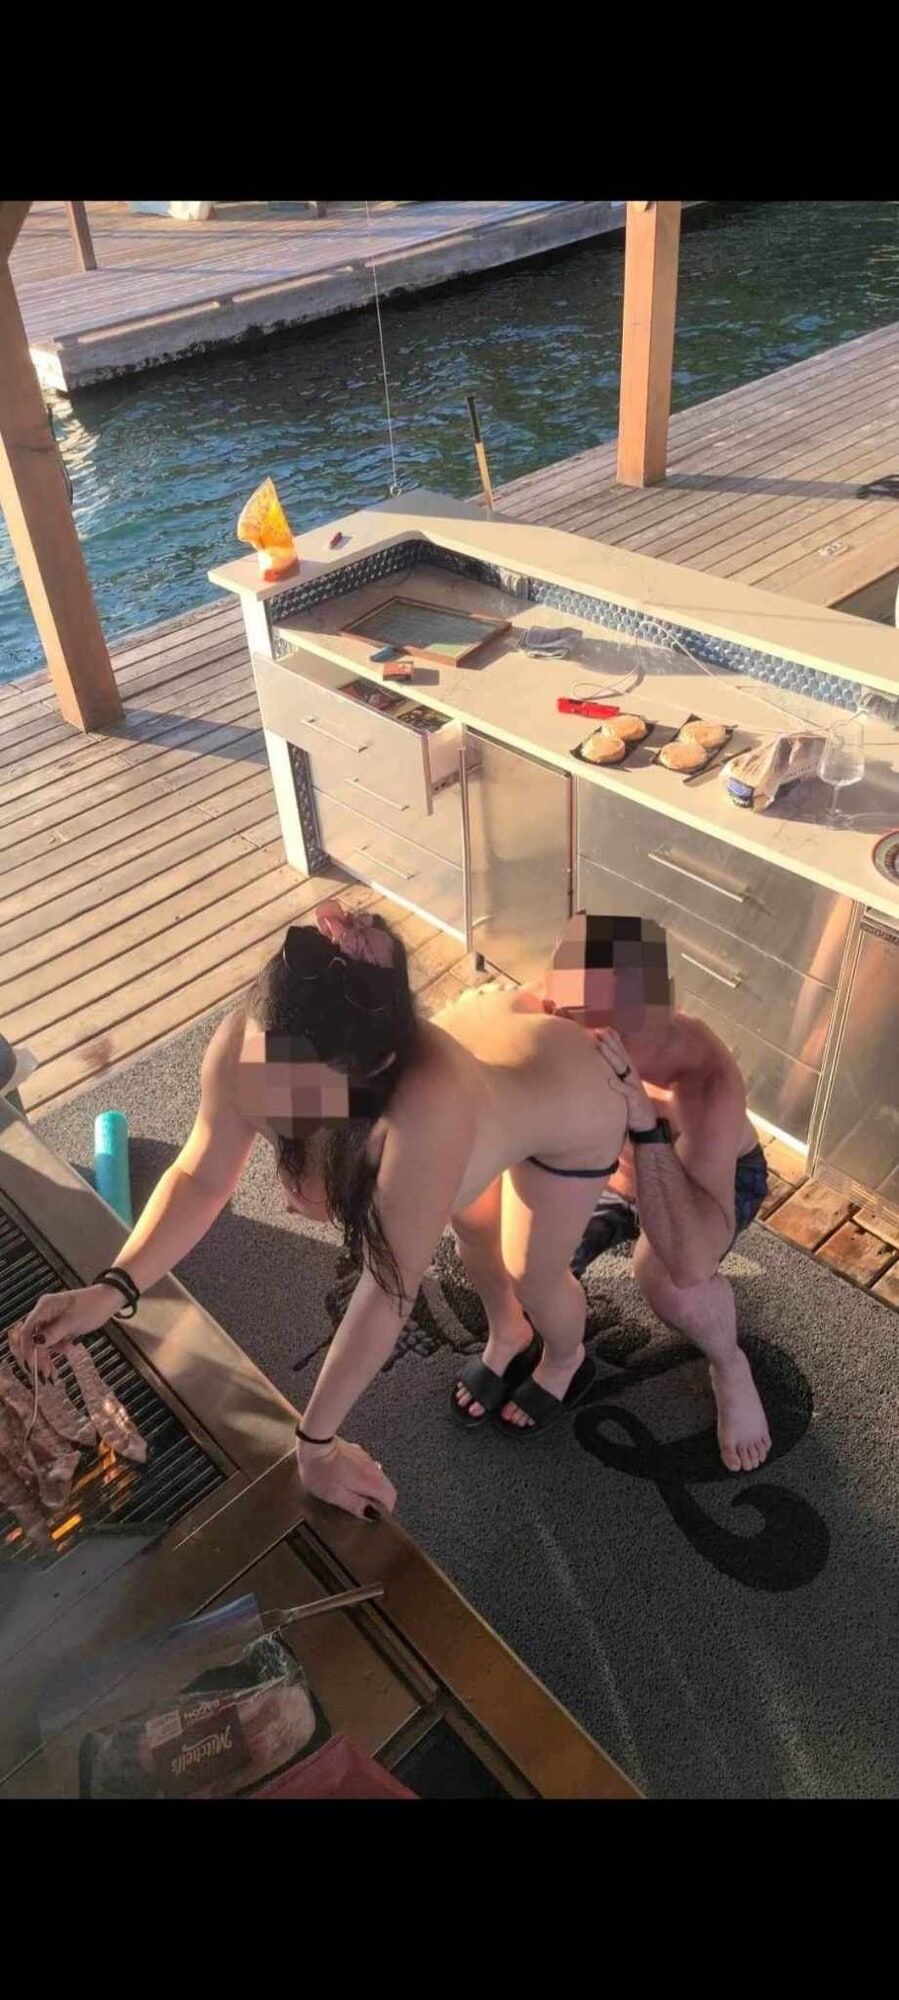 Hot wife vacation #19